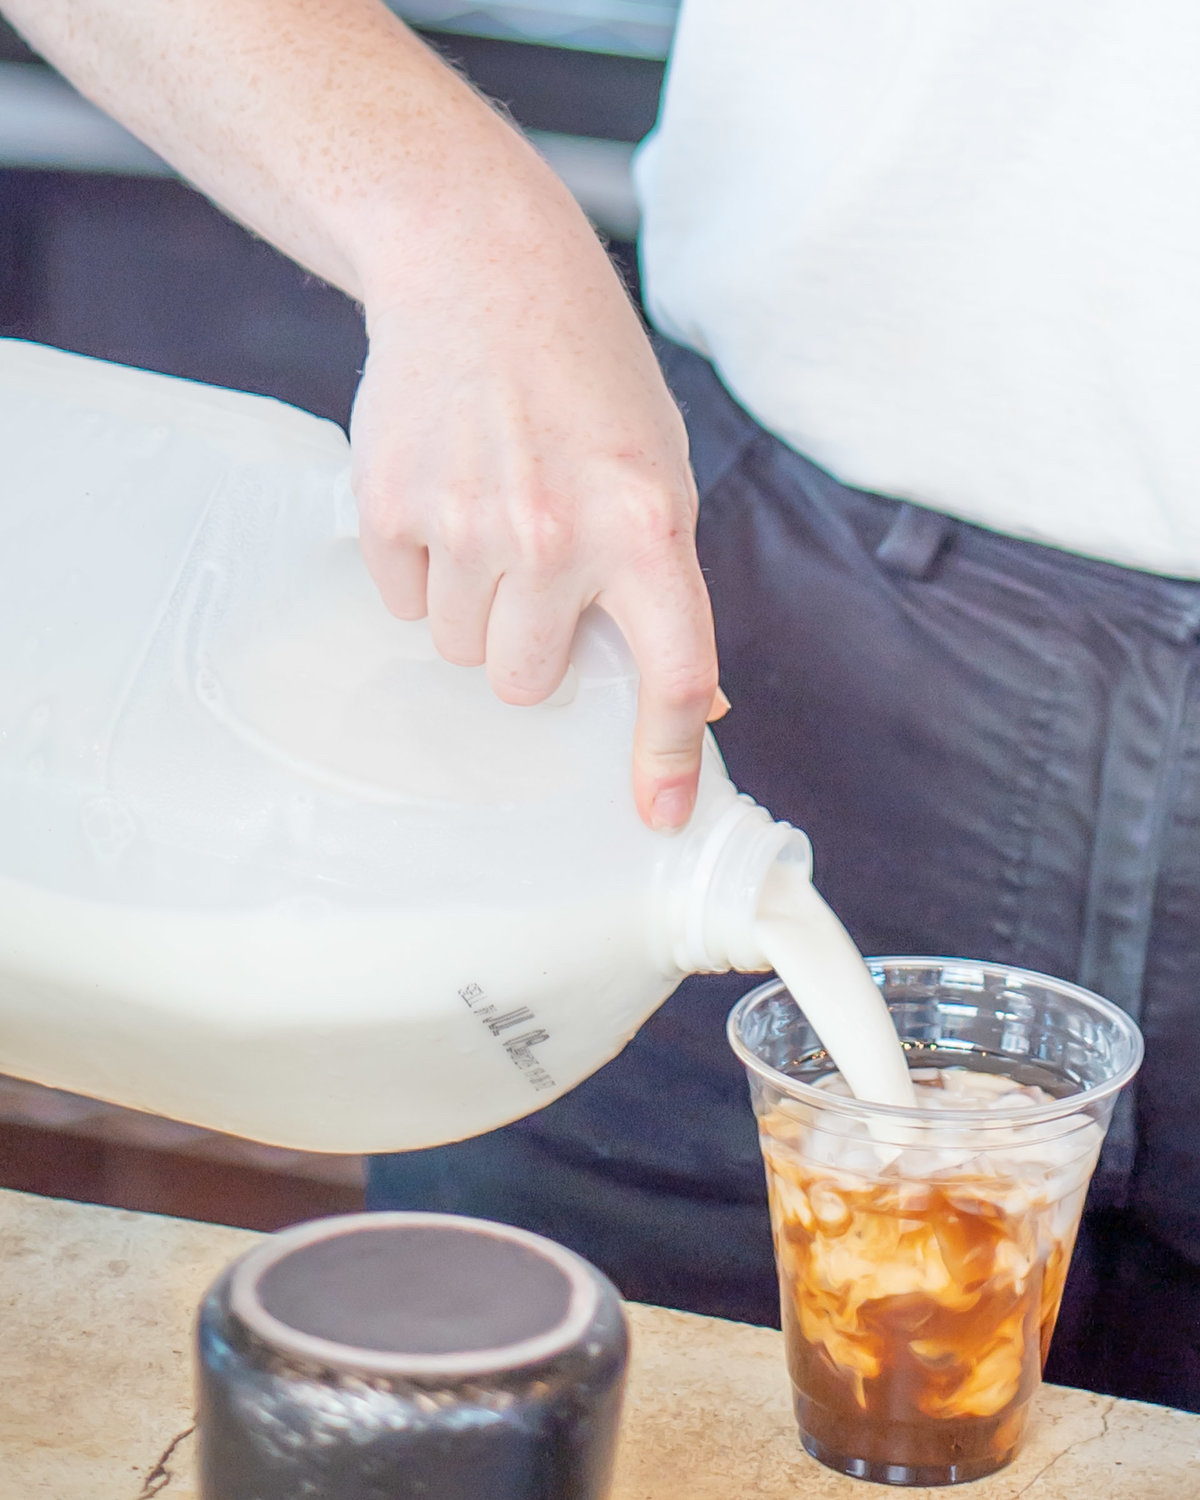 Milk being poured into a cup of coffee